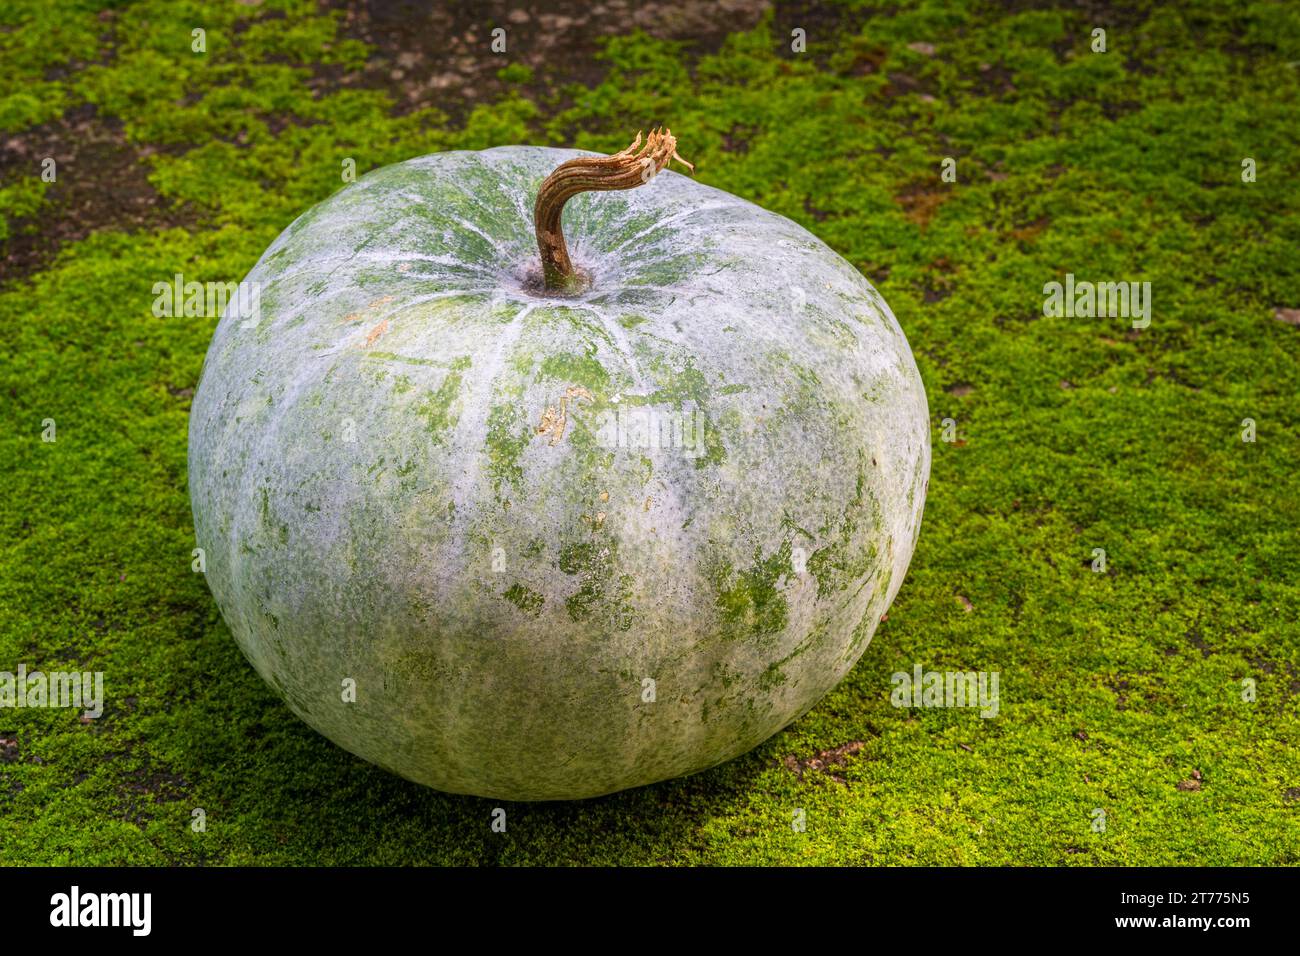 Closeup view of round unpeeled benincasa hispida aka wax gourd, white gourd or ash pumpkin outdoors isolated on green moss background Stock Photo